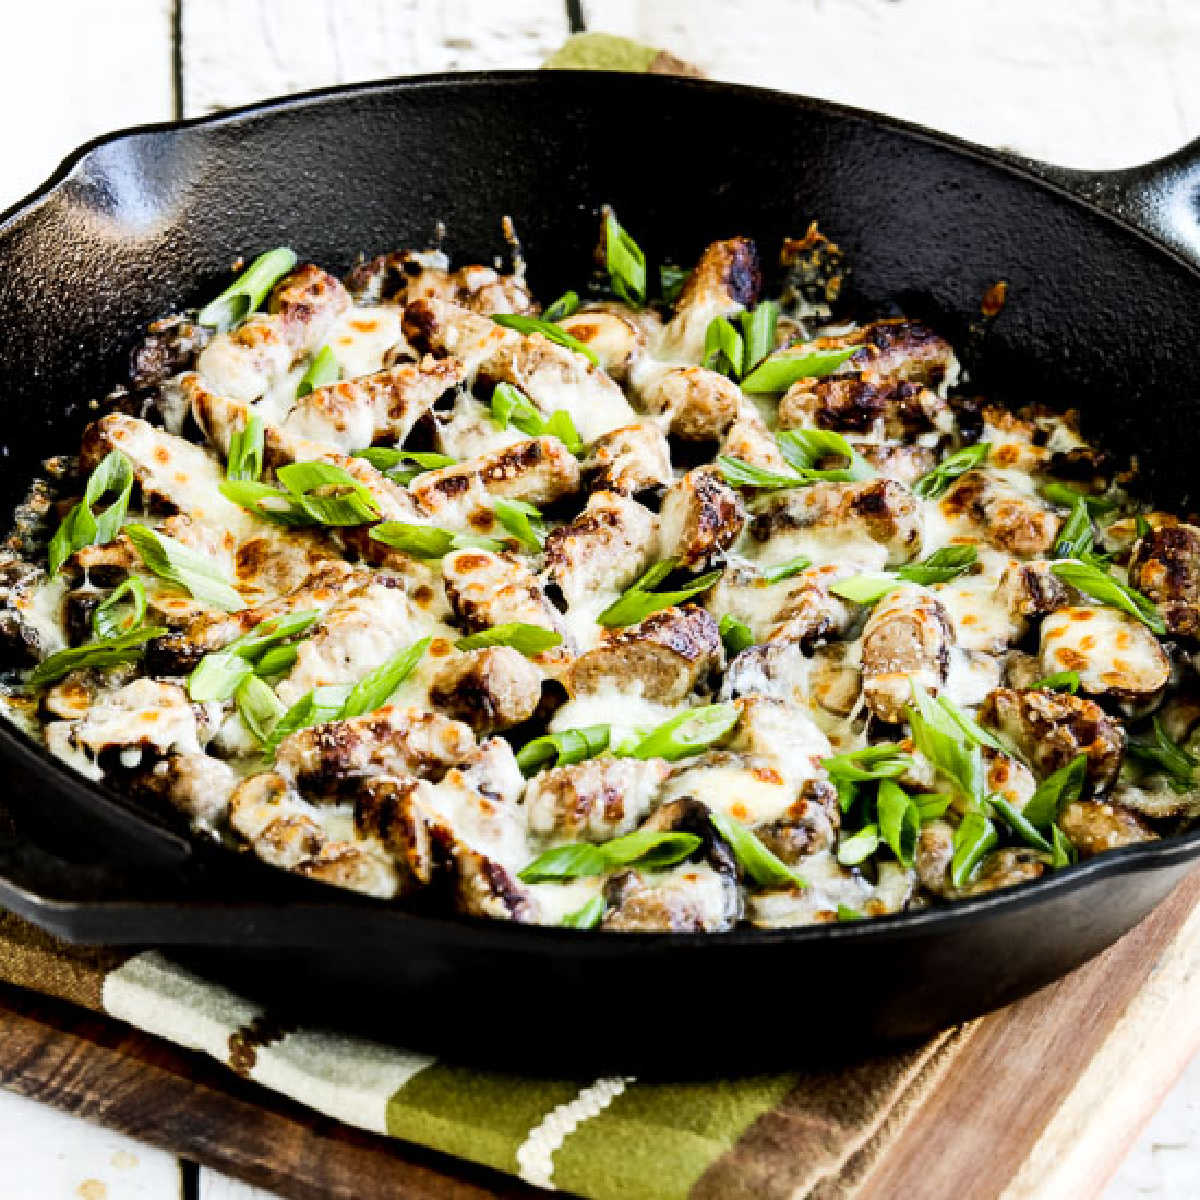 Square image for One-Pan Sausage Mushroom Breakfast without Egg shown in cast-iron skillet.